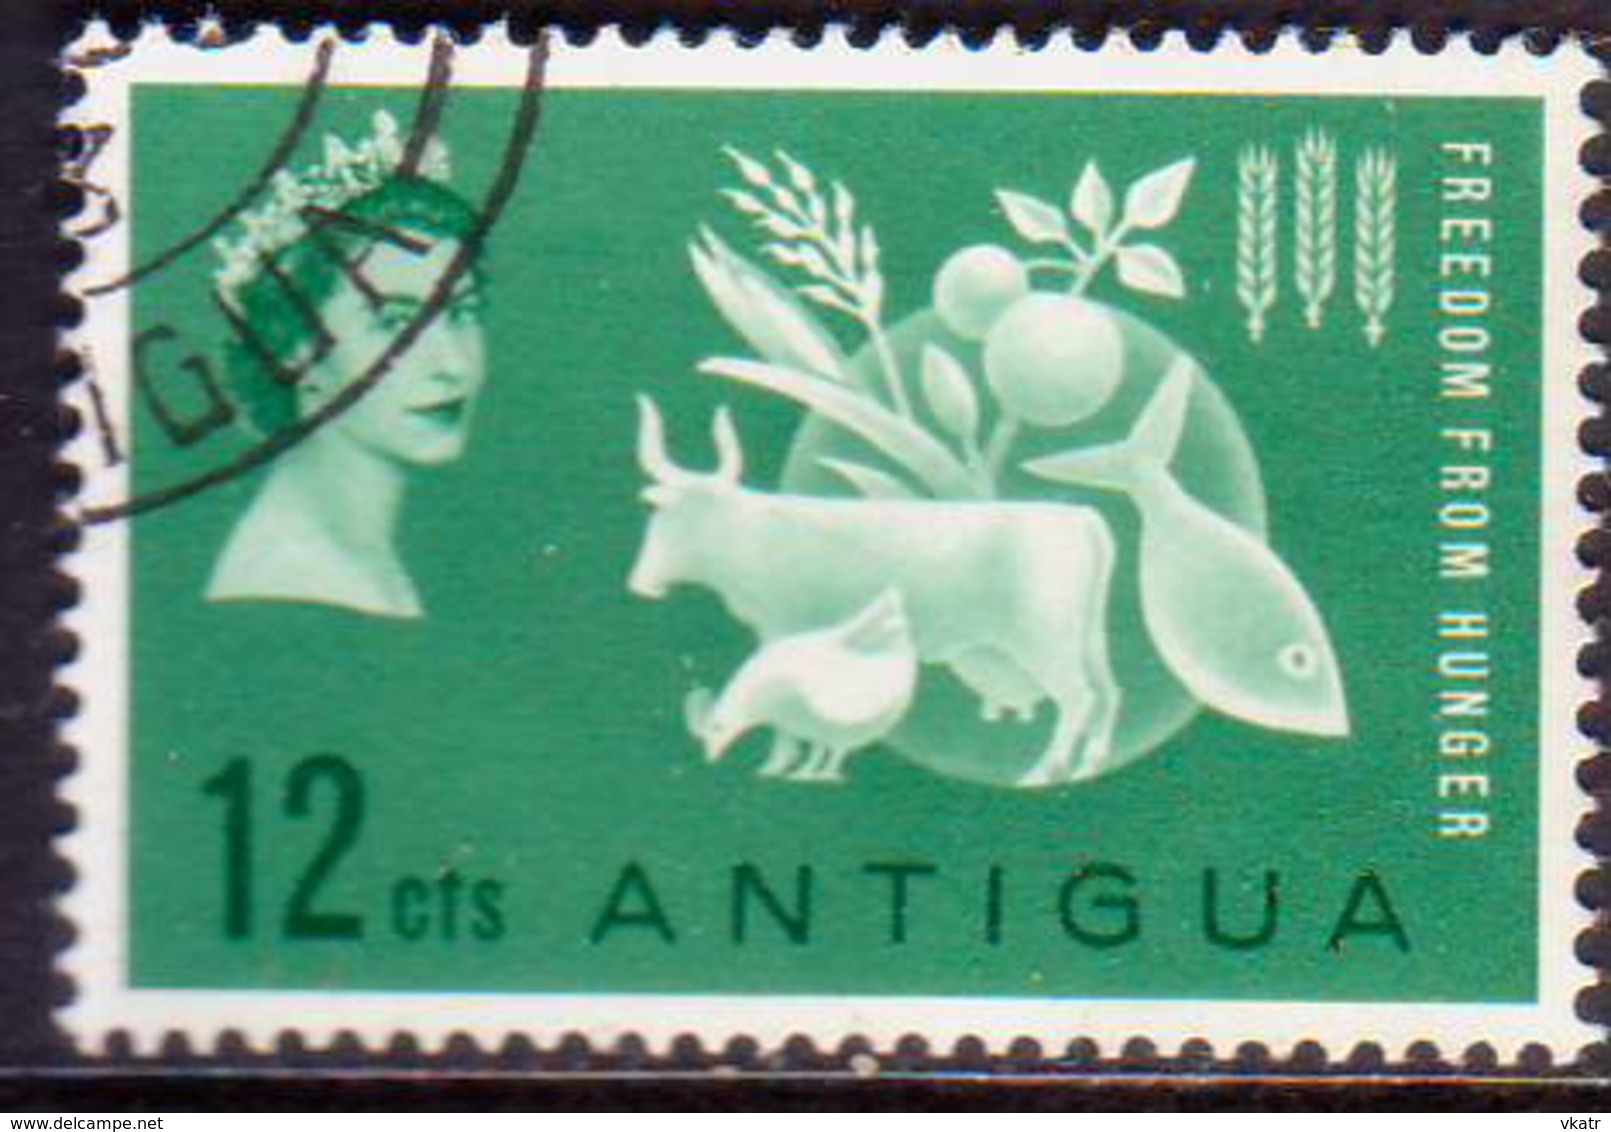 ANTIGUA 1963 SG #146 12c Used Freedom From Hunger - 1960-1981 Ministerial Government